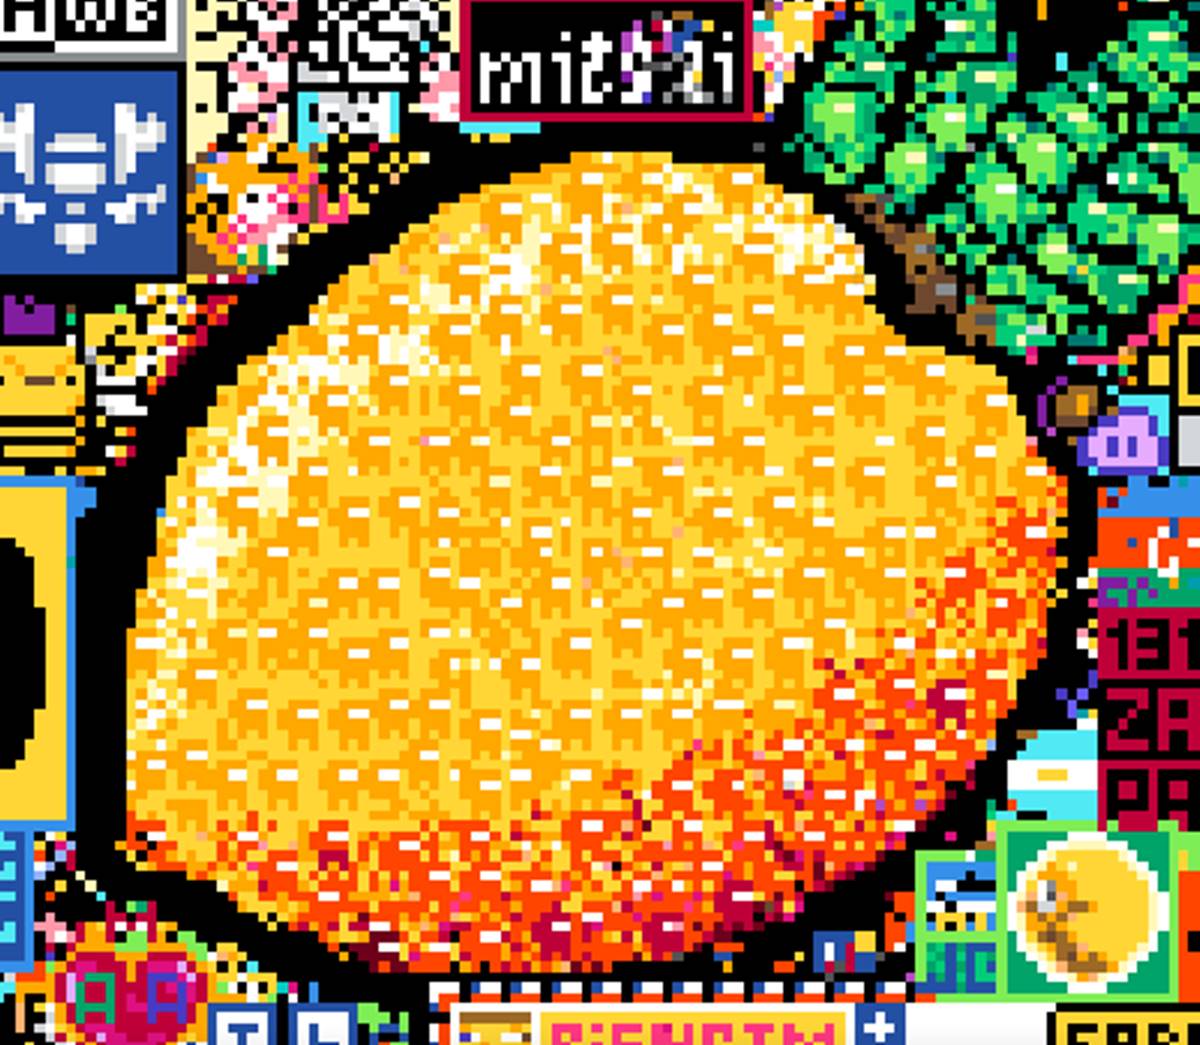 /r/place experiment contains tiny Among Us crewmates hidden throughout the canvas